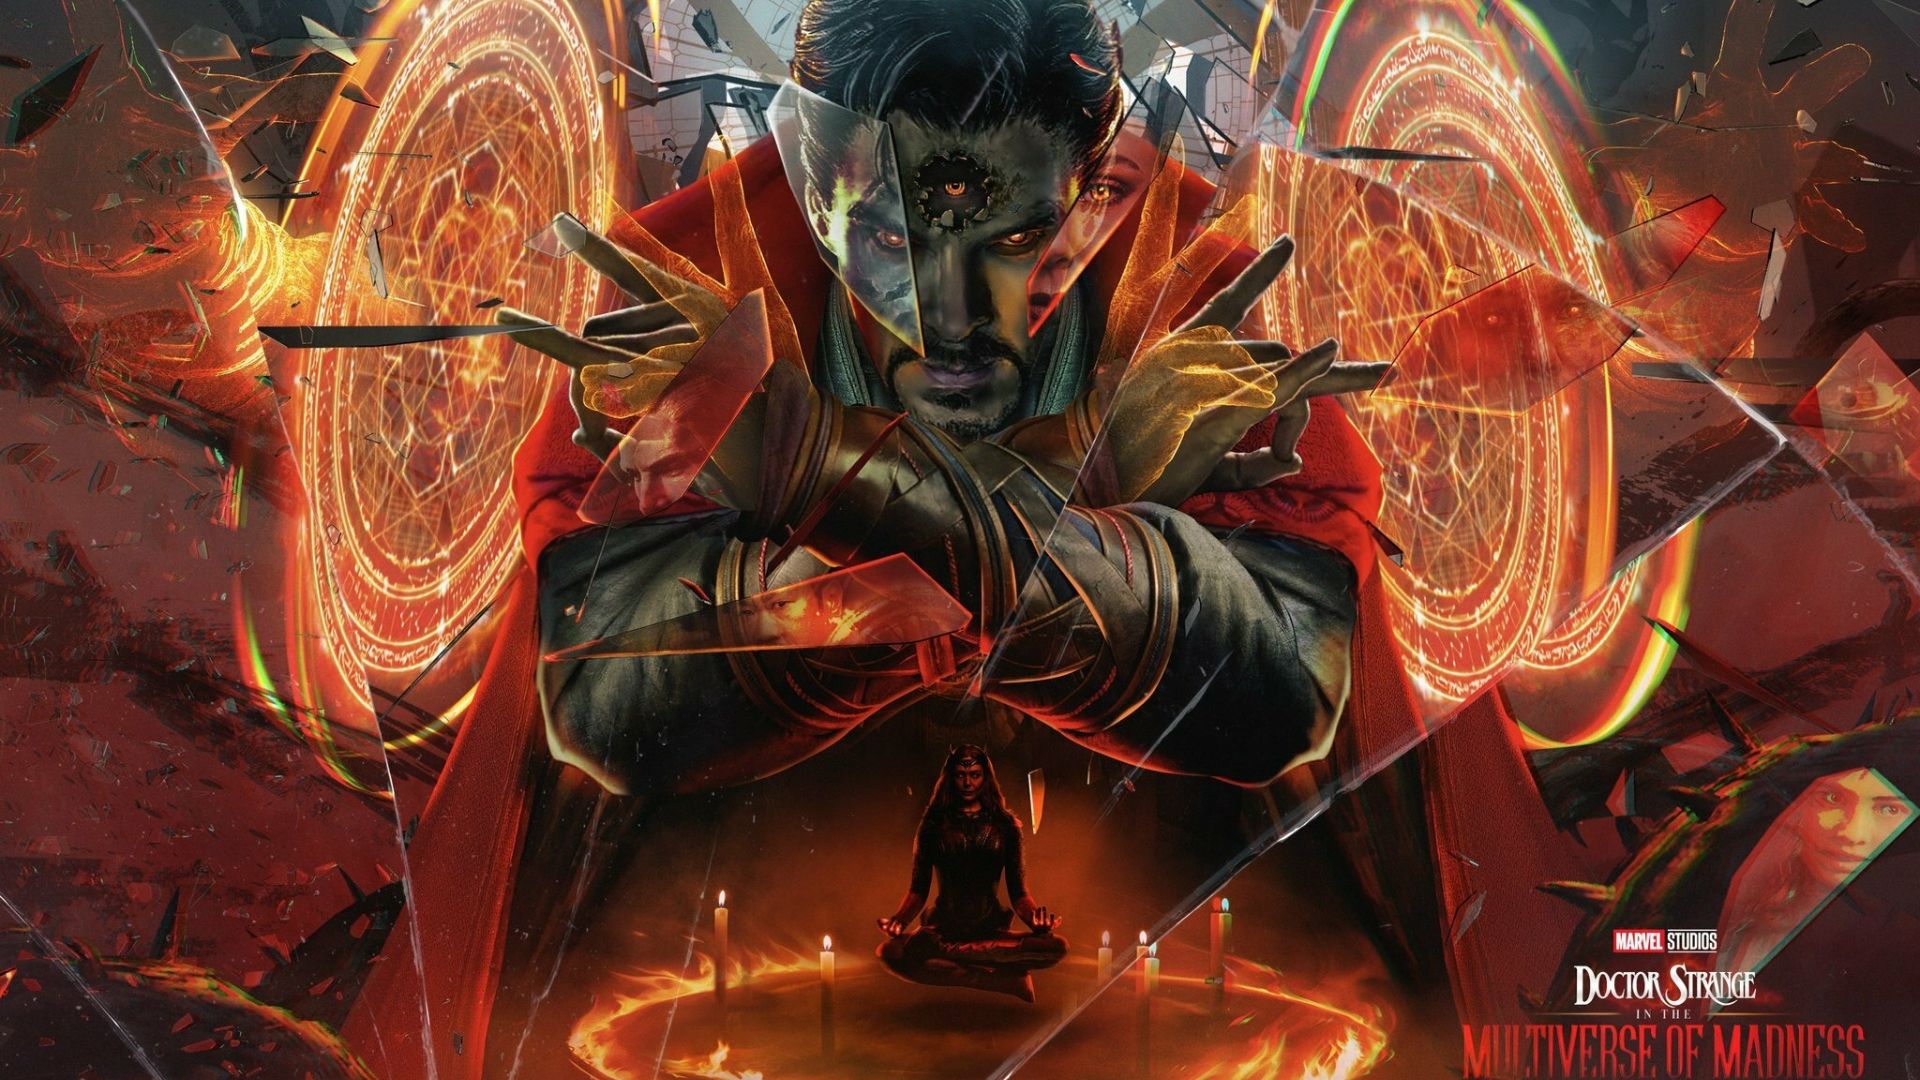 Wallpaper Doctor Strange in the Multiverse of Madness, doctor strange and scarlet witch, poster